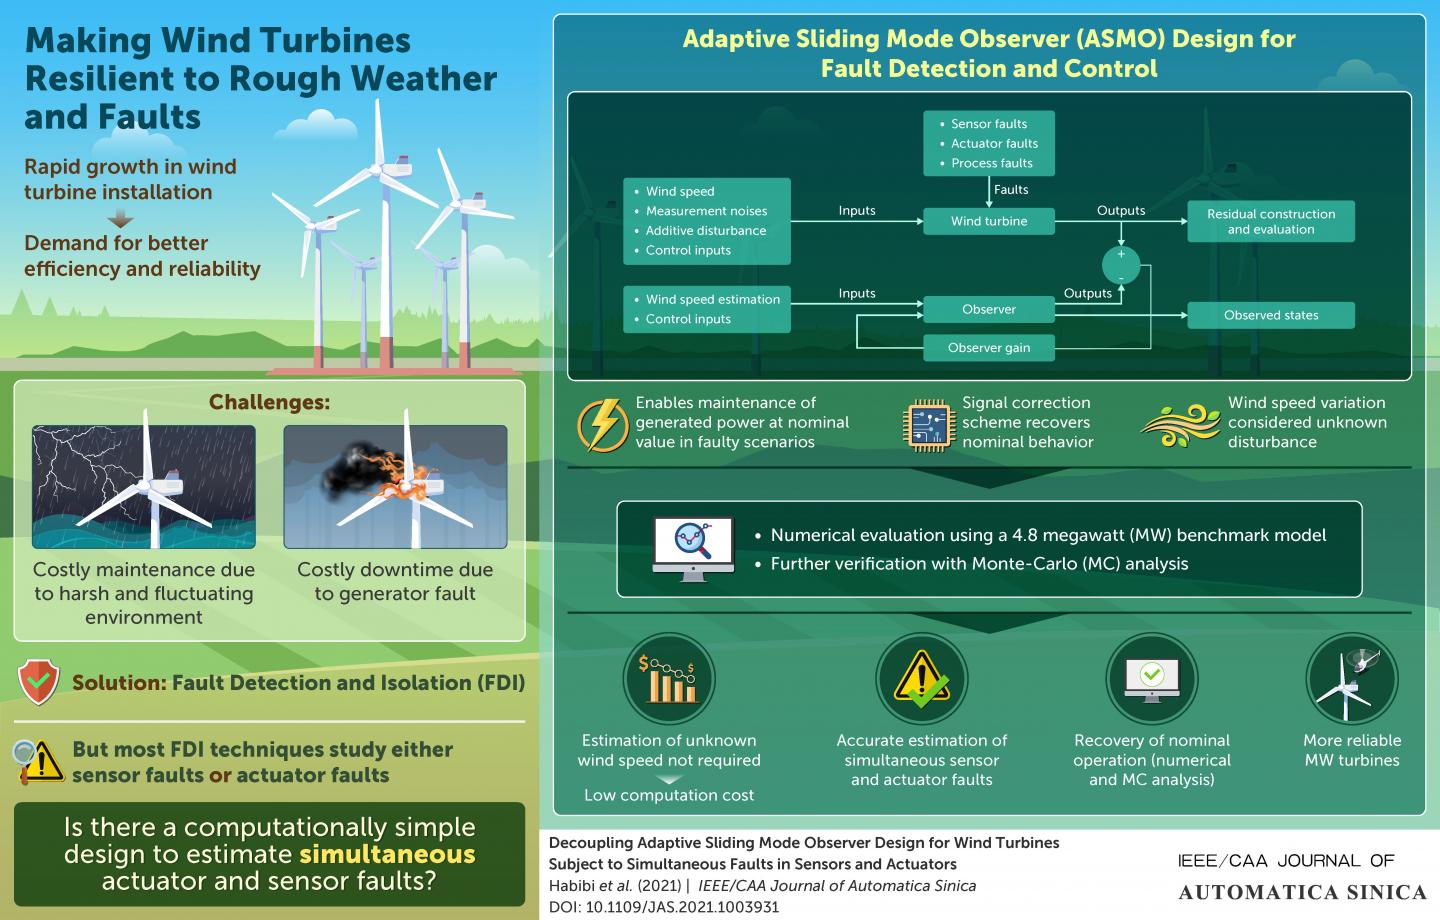 Making wind turbines resilient to rough weather and faults